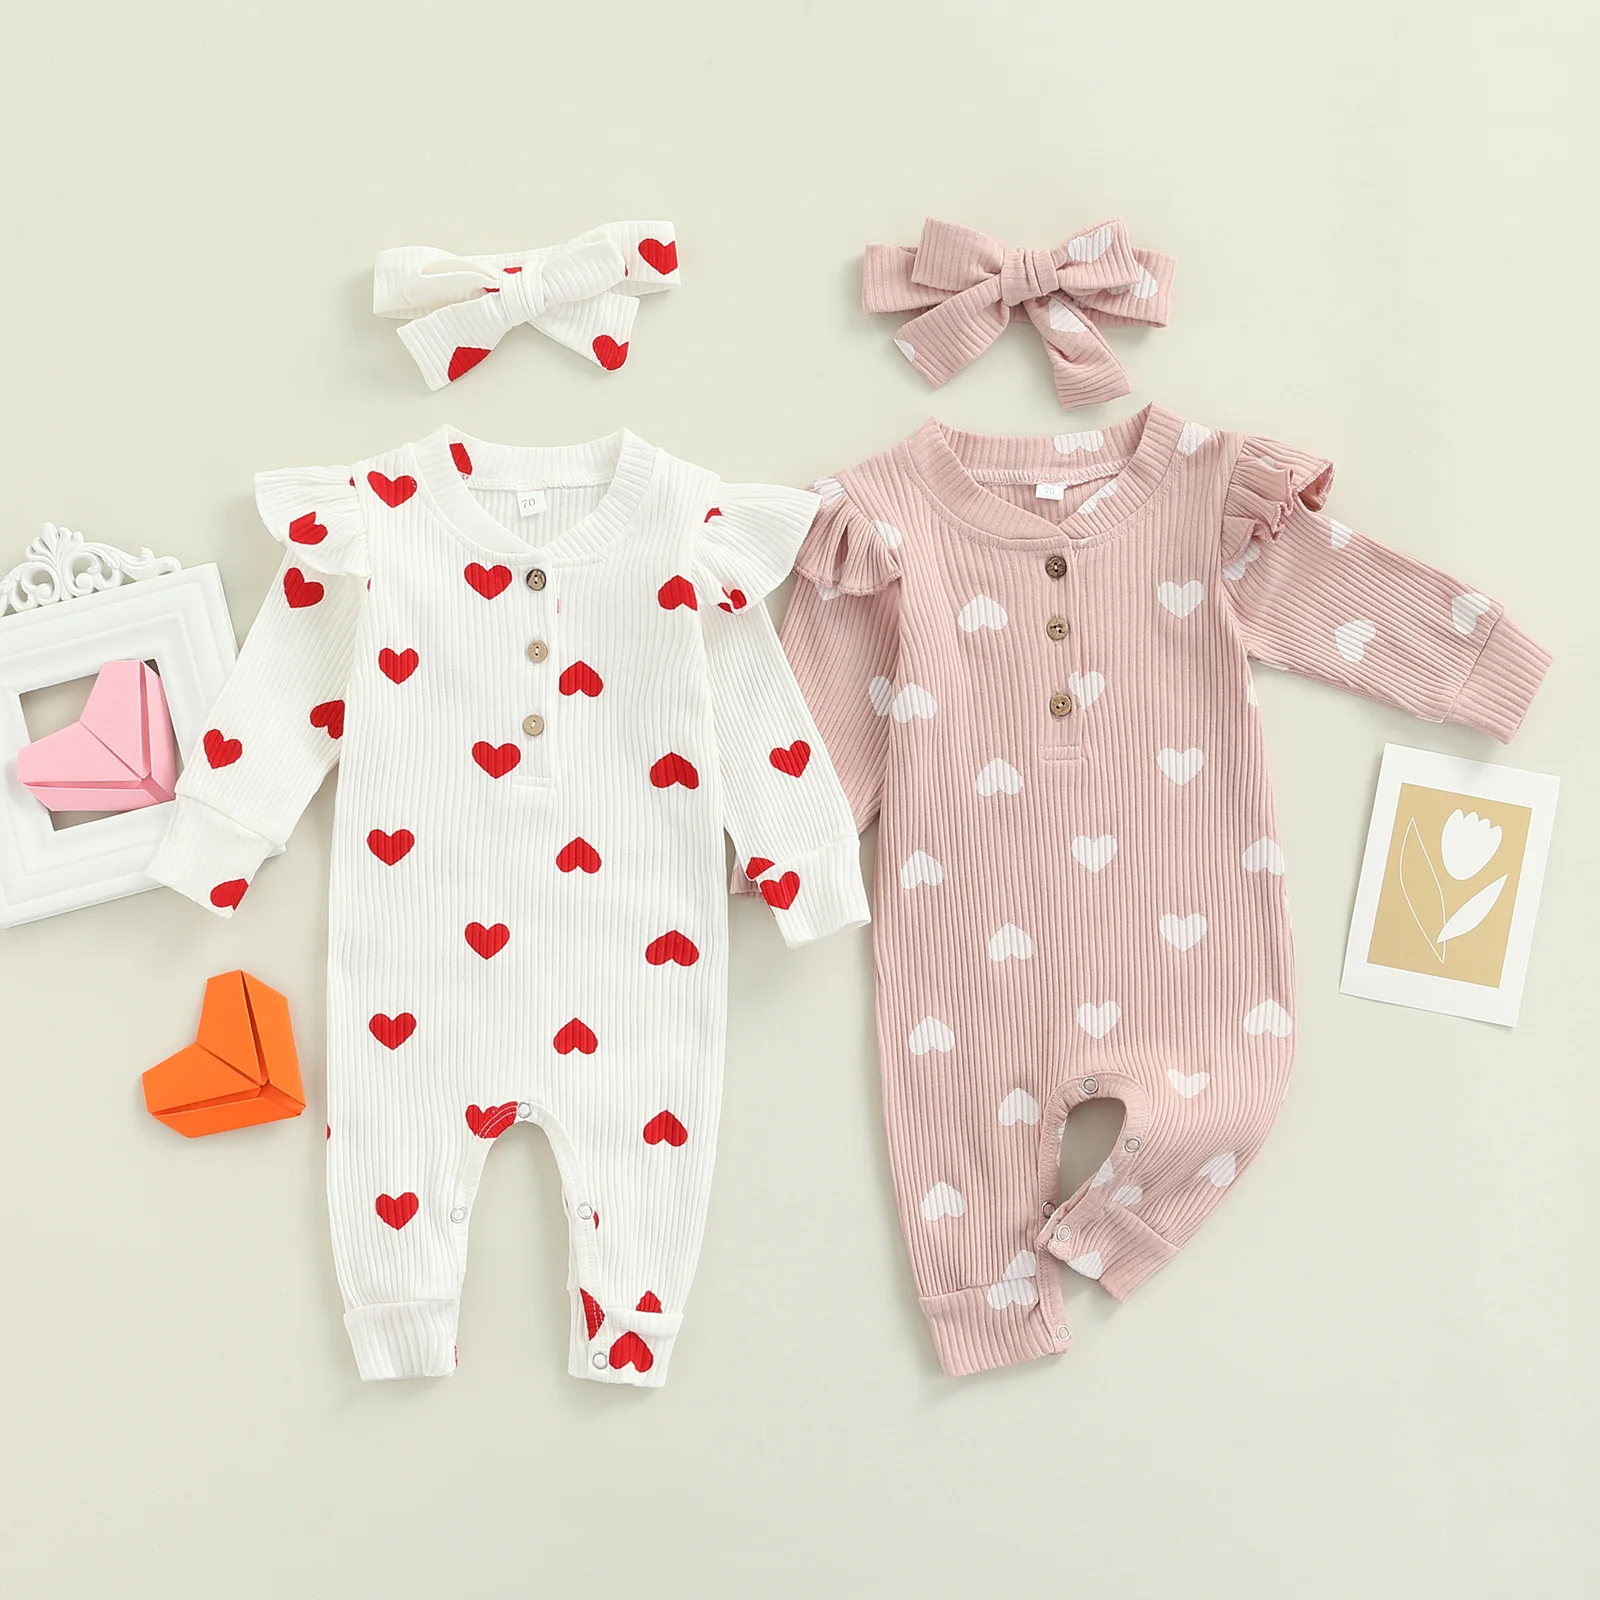 

Pudcoco 0-18M 2Pcs Newborn Infant Baby Girl Cute Romper Long Sleeve Off Shoulder O-Neck Heart Printed Jumpsuit 2 Styles+Headwear